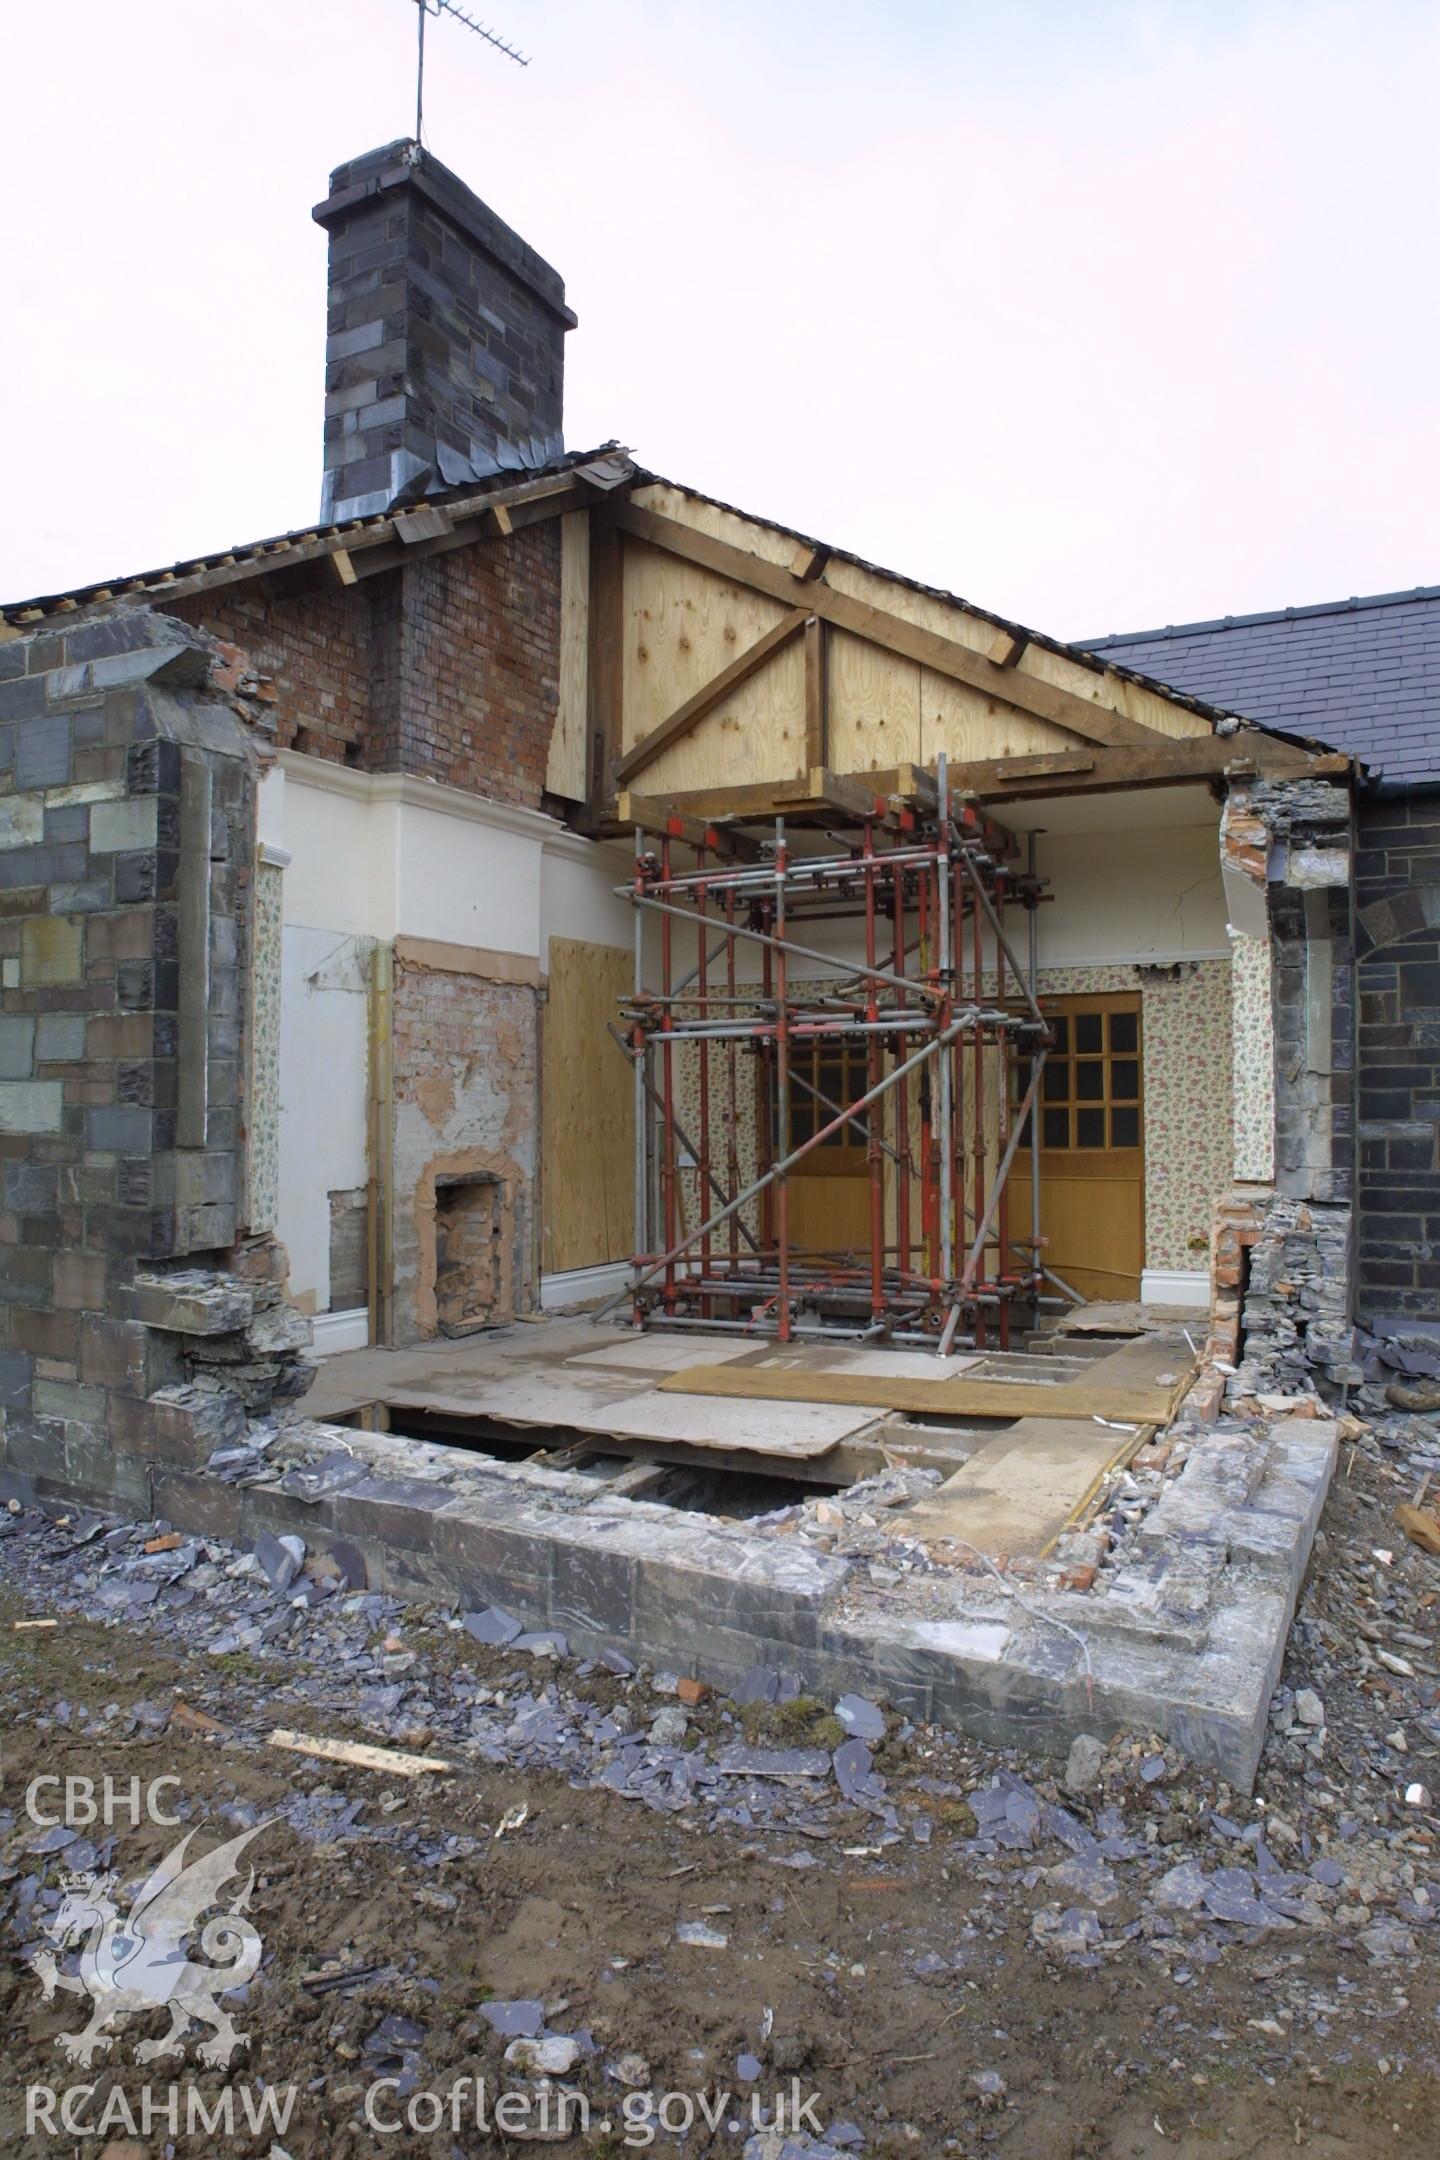 Digital colour photograph showing rennovation work in a room at Penrhyn Quarry Offices. The photograph also shows part of a missing exterior wall.